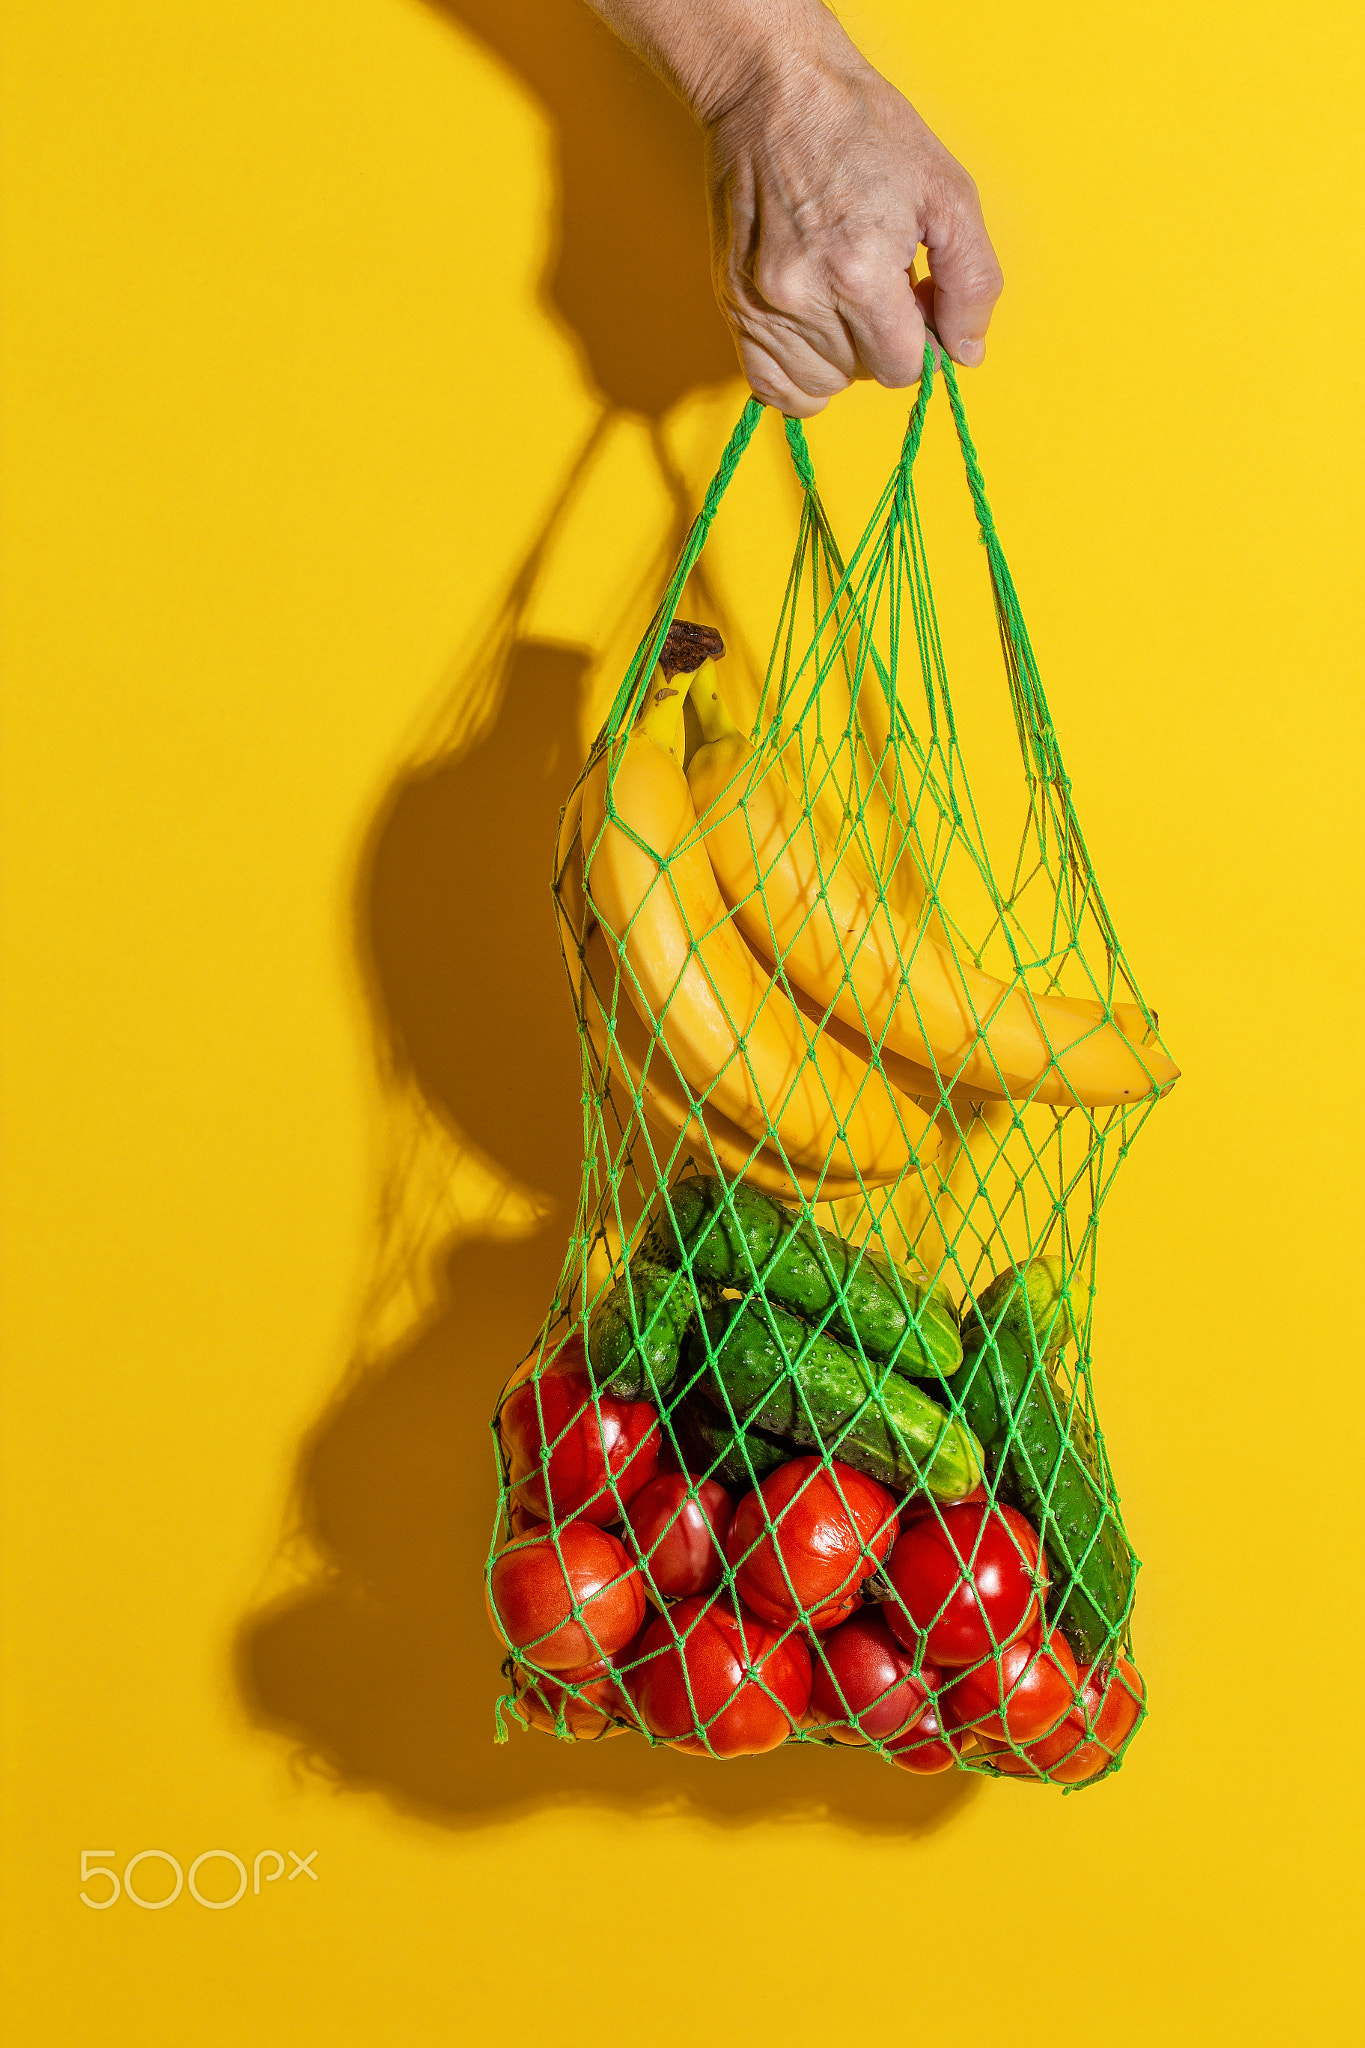 Male hand holding a white mesh bag with vegetables on yellow